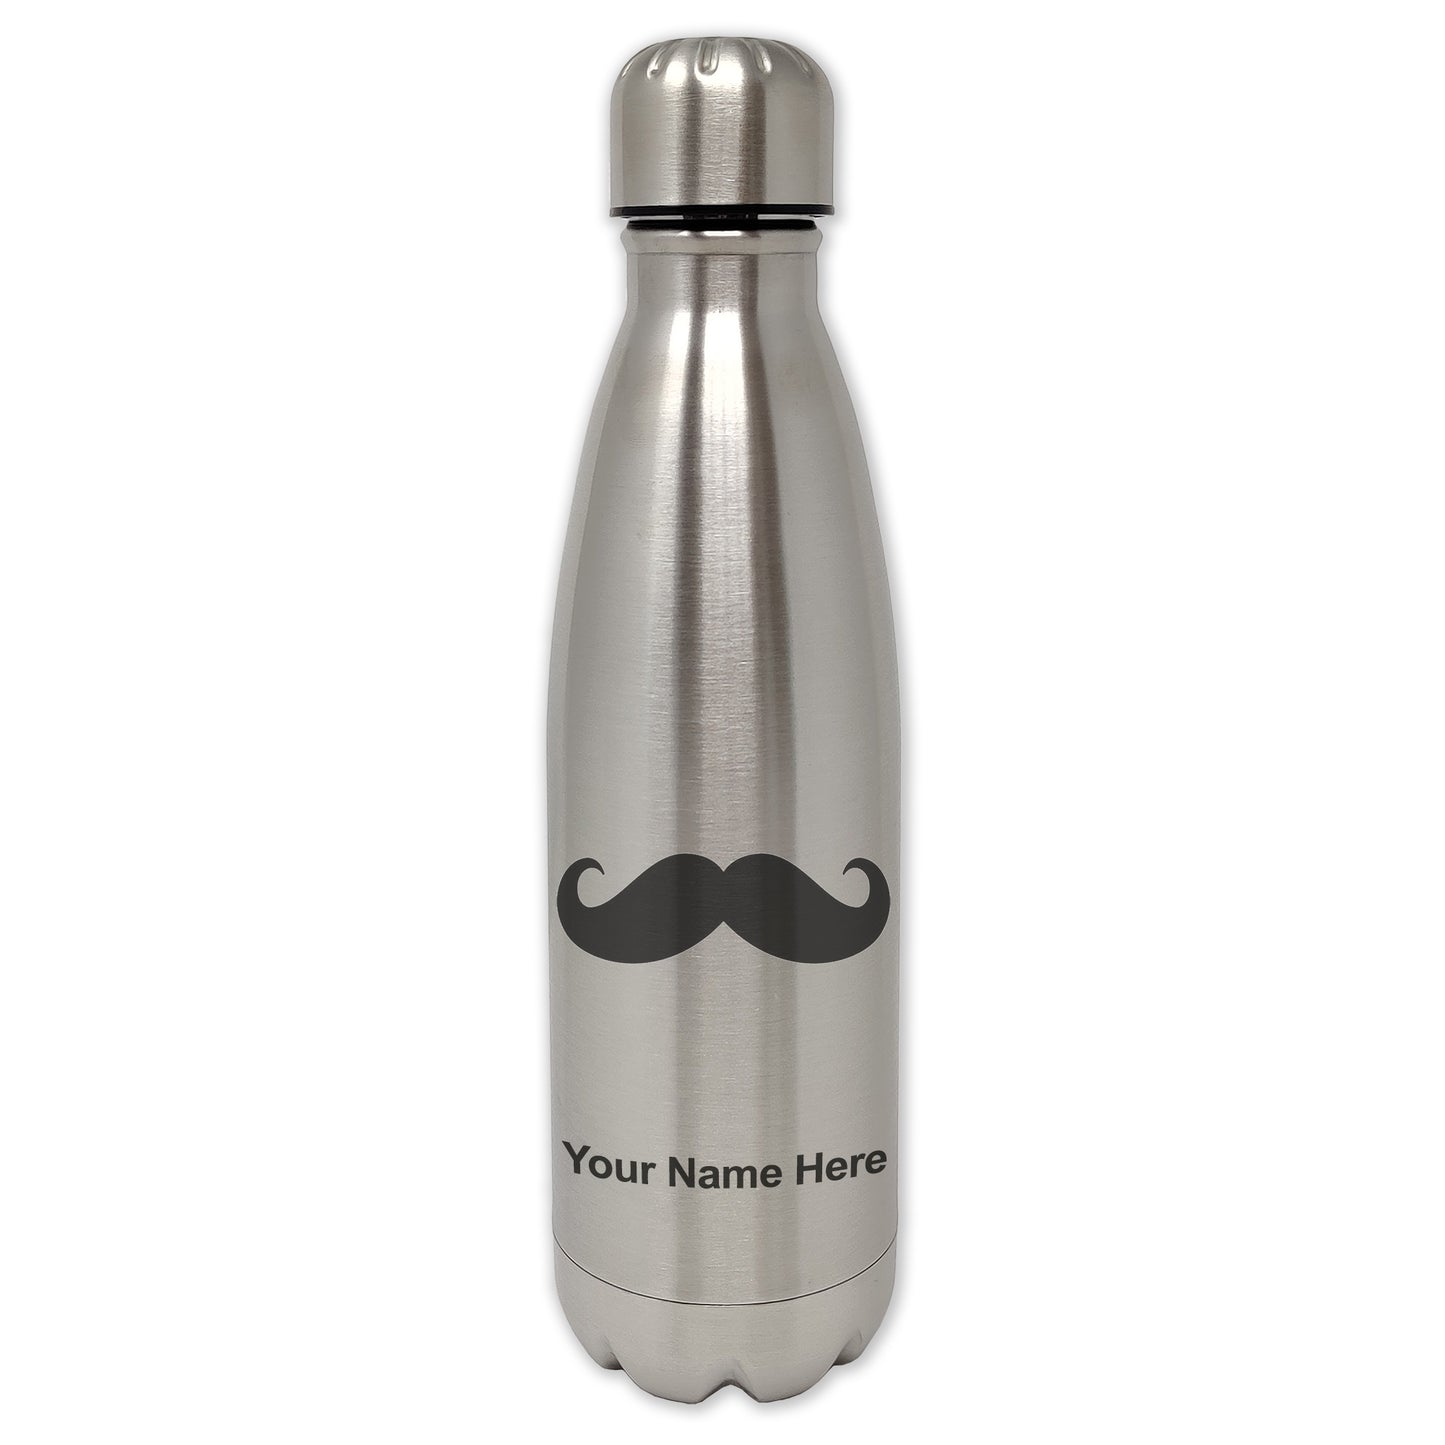 LaserGram Single Wall Water Bottle, Mustache, Personalized Engraving Included